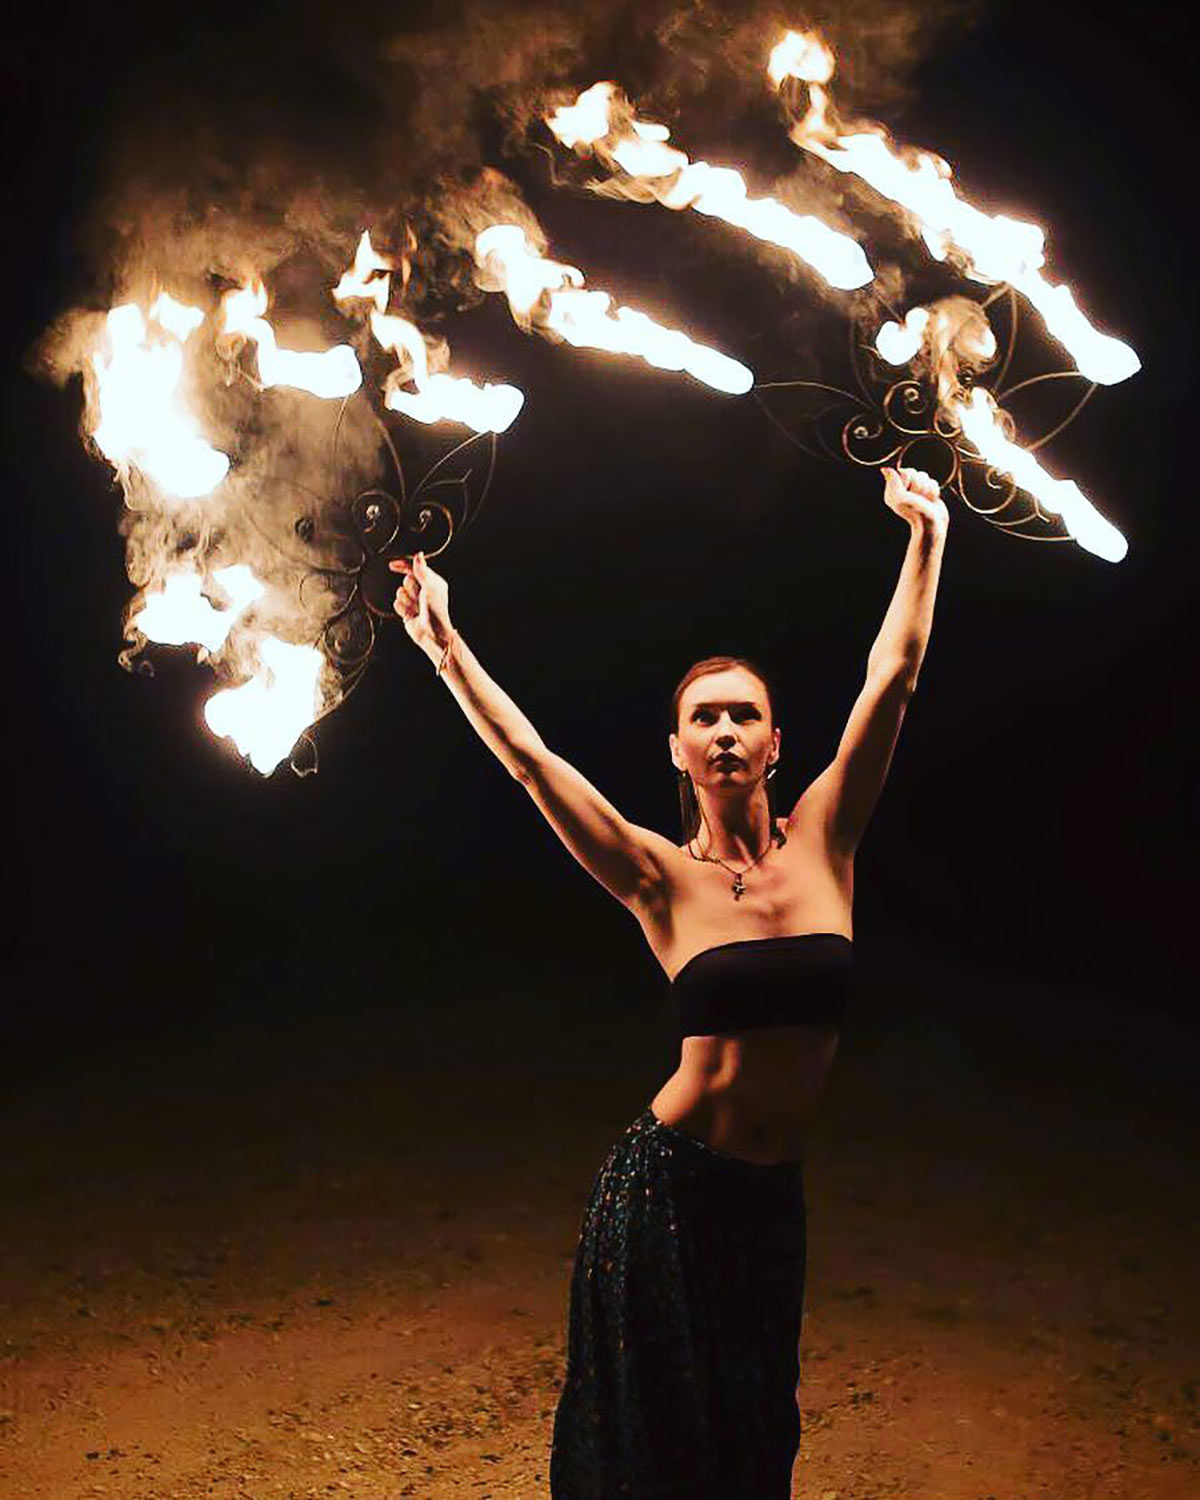 Fire dancers are in vogue